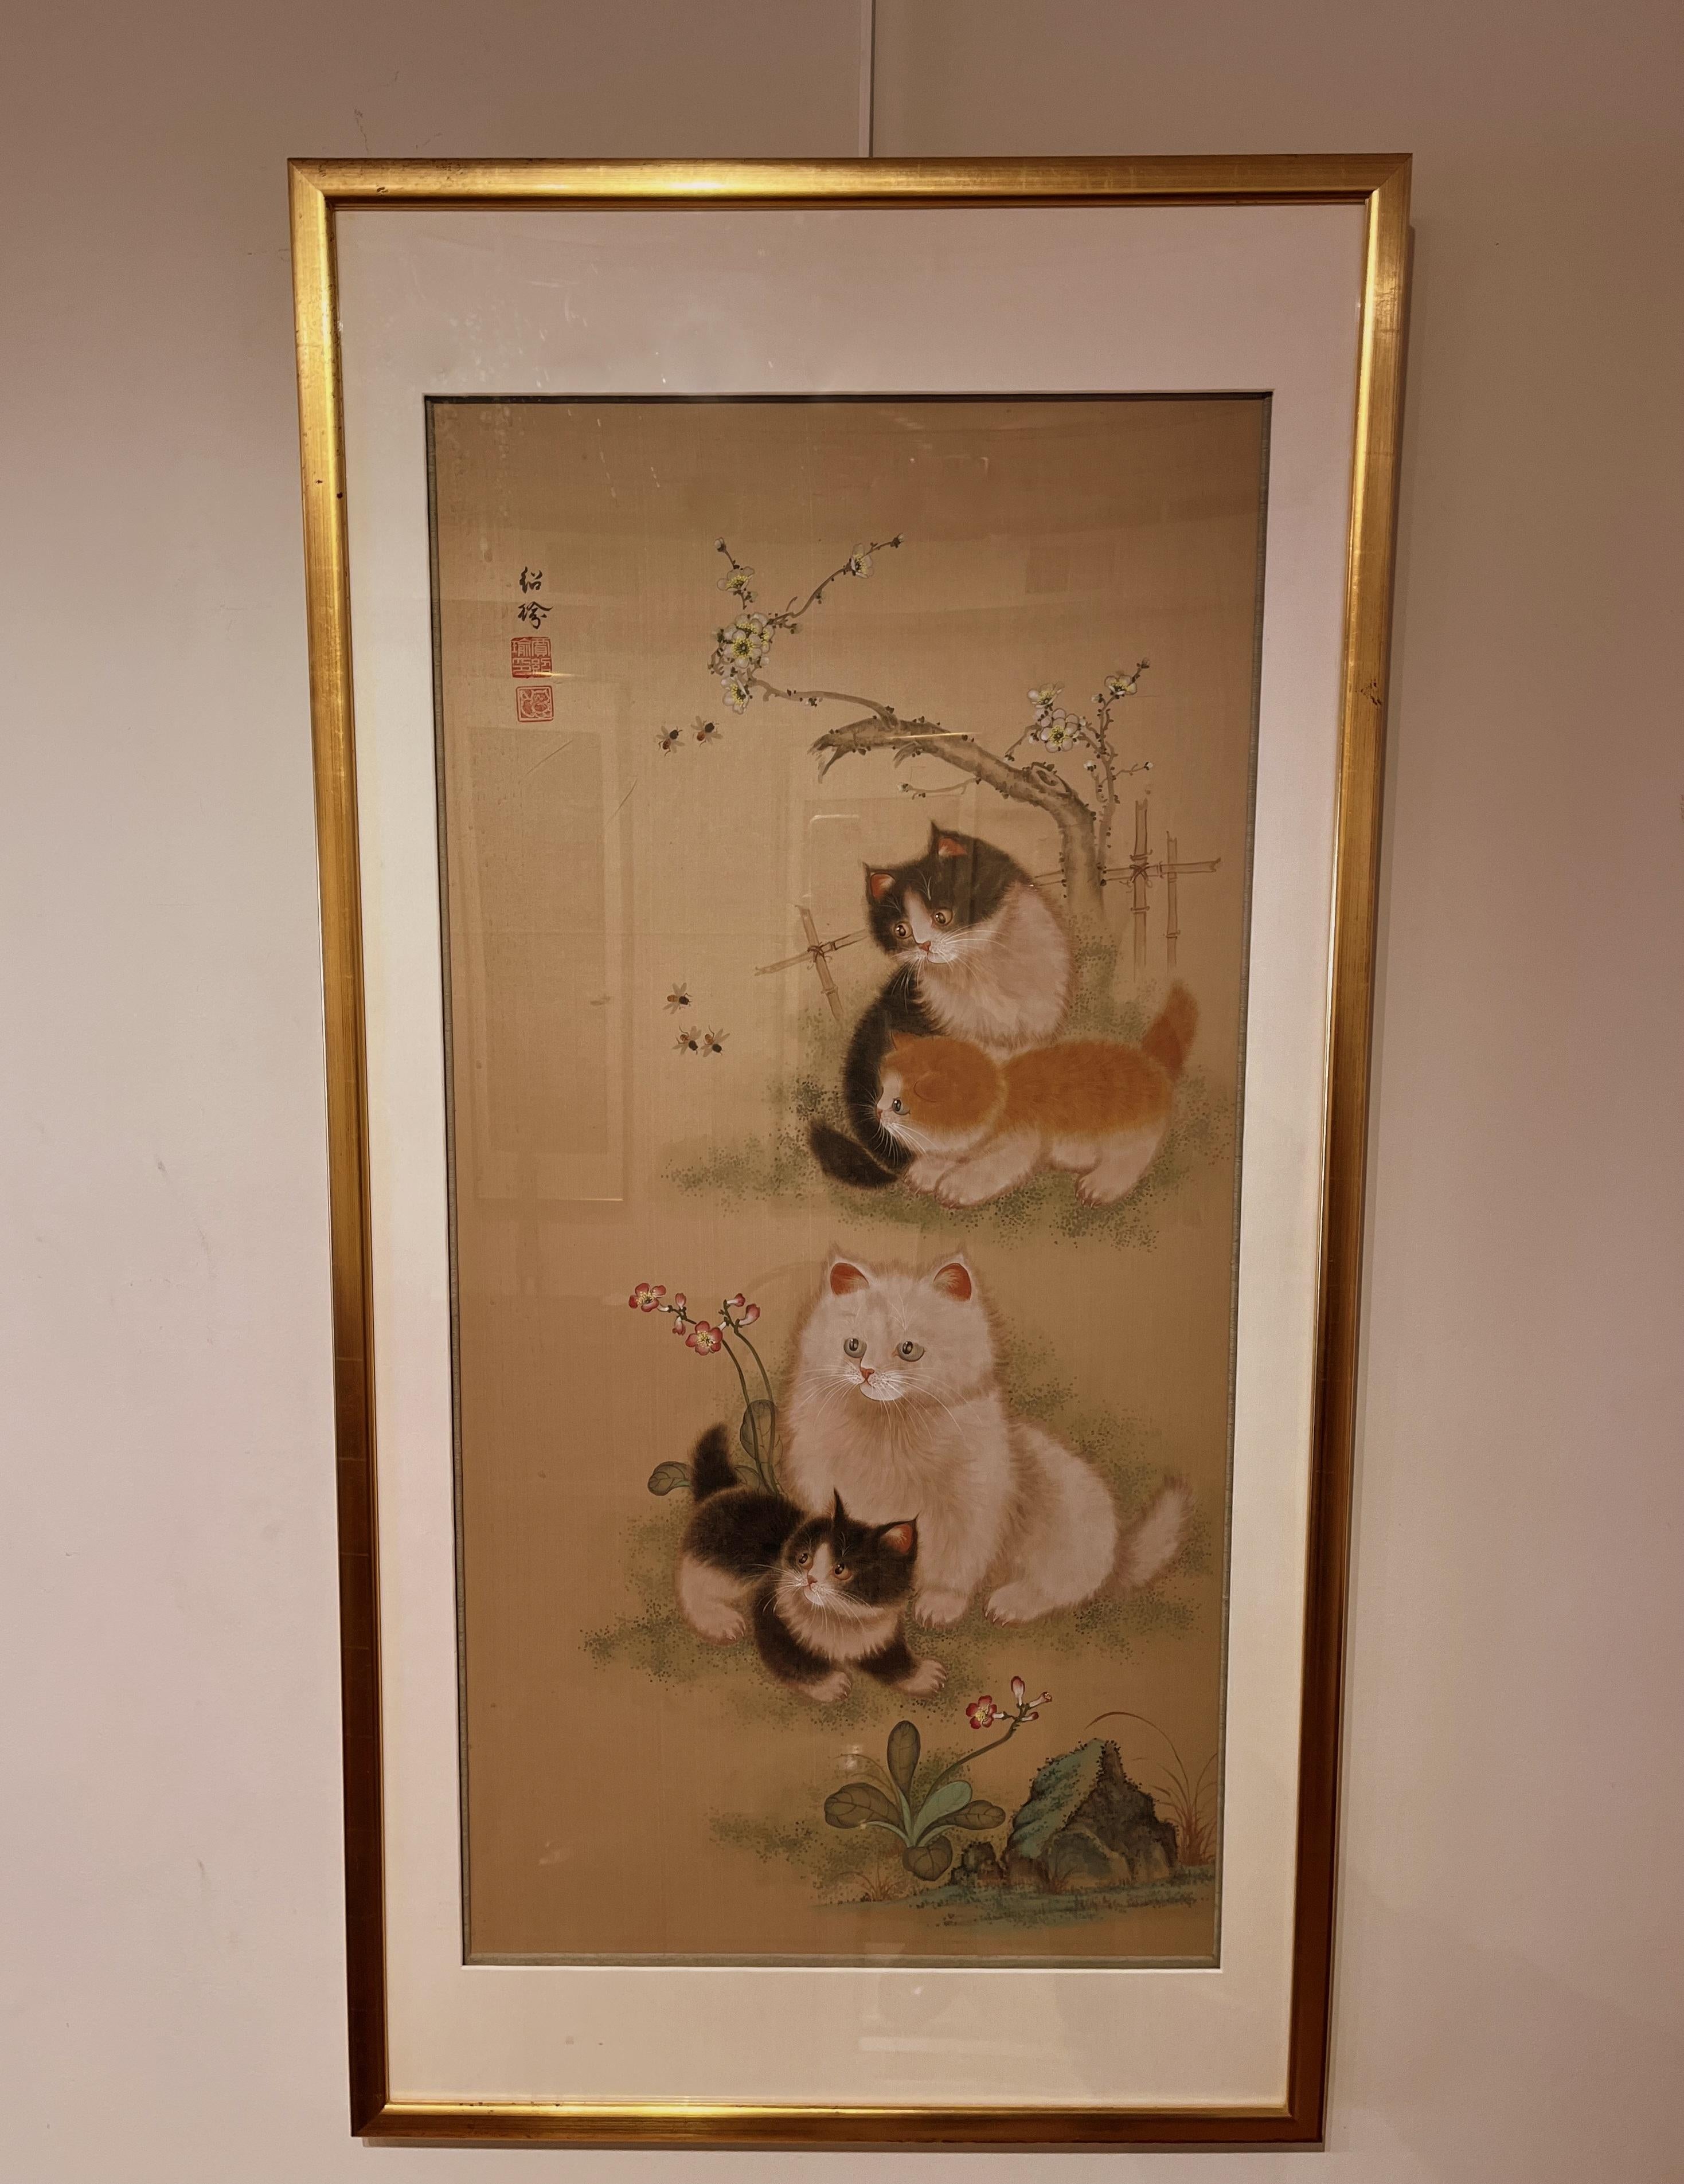 Fine elegant Japanese brush painting of four kittens with bees and flowers, curious and adorable kitten watching bees.
Very finely painted. Ca. 1900 , ink and color on silk. Conservation framed
Overall size with frame:  25